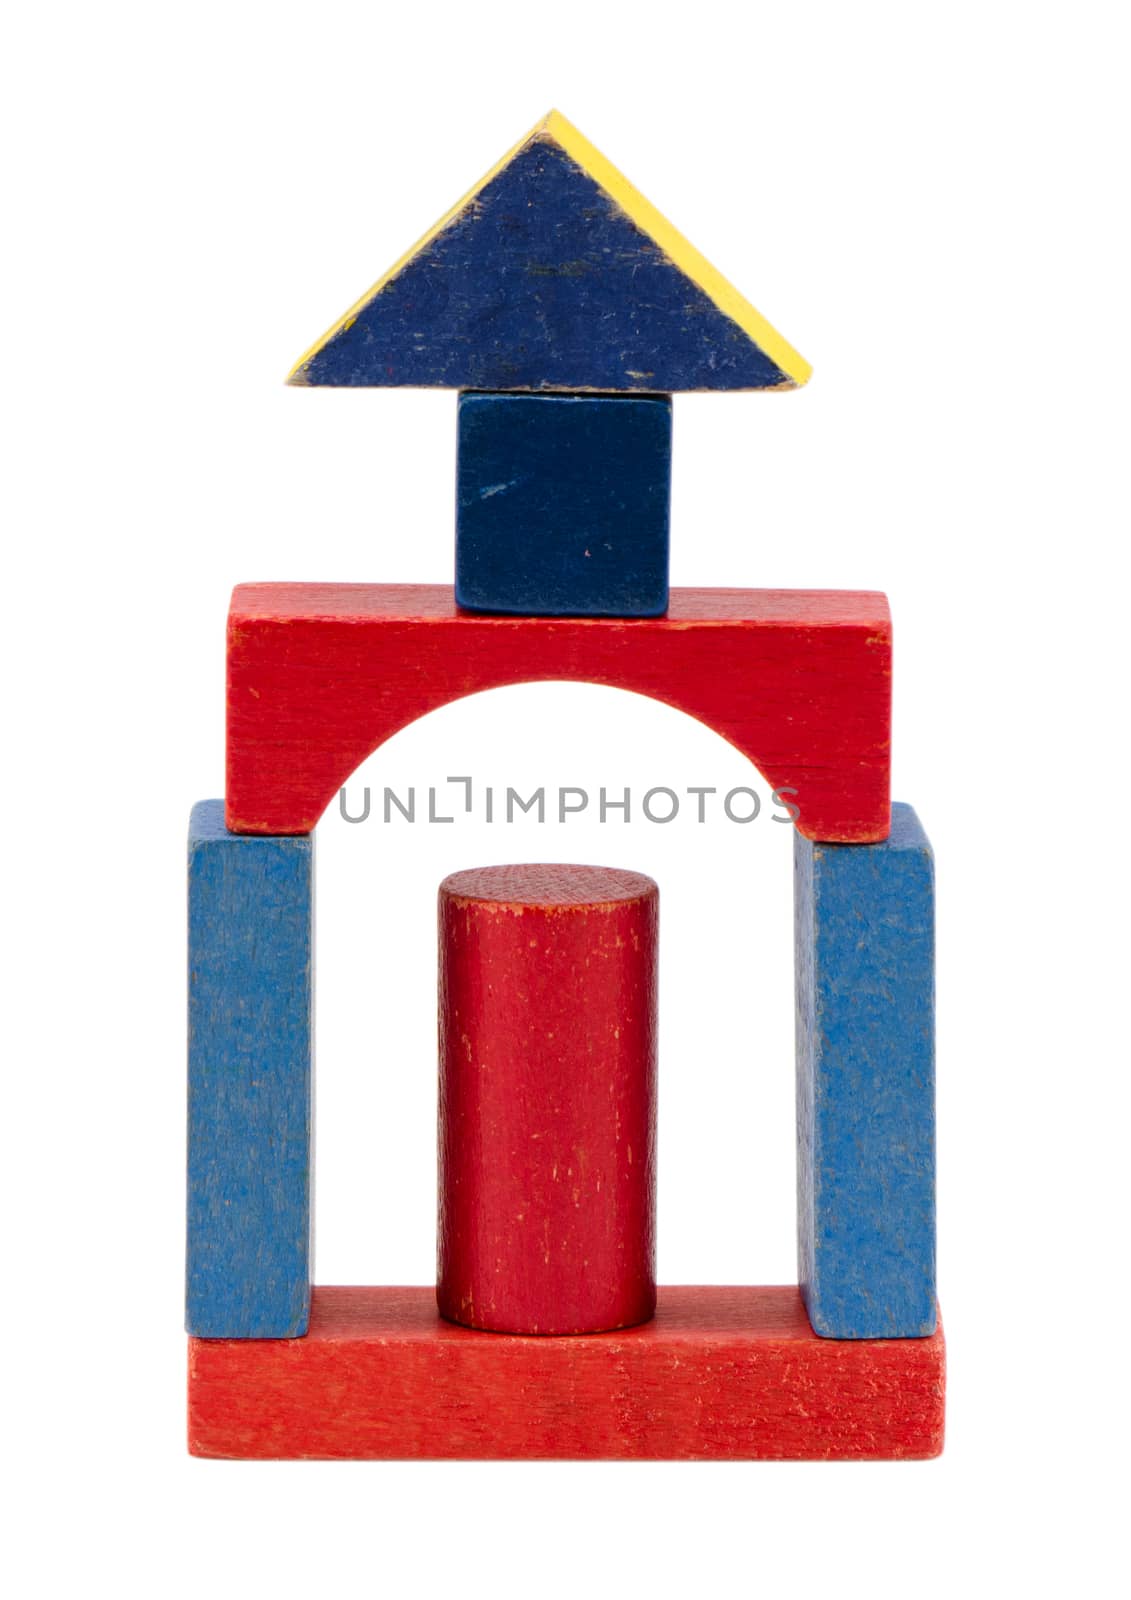 wooden colorful toy building blocks logs isolated on white background.